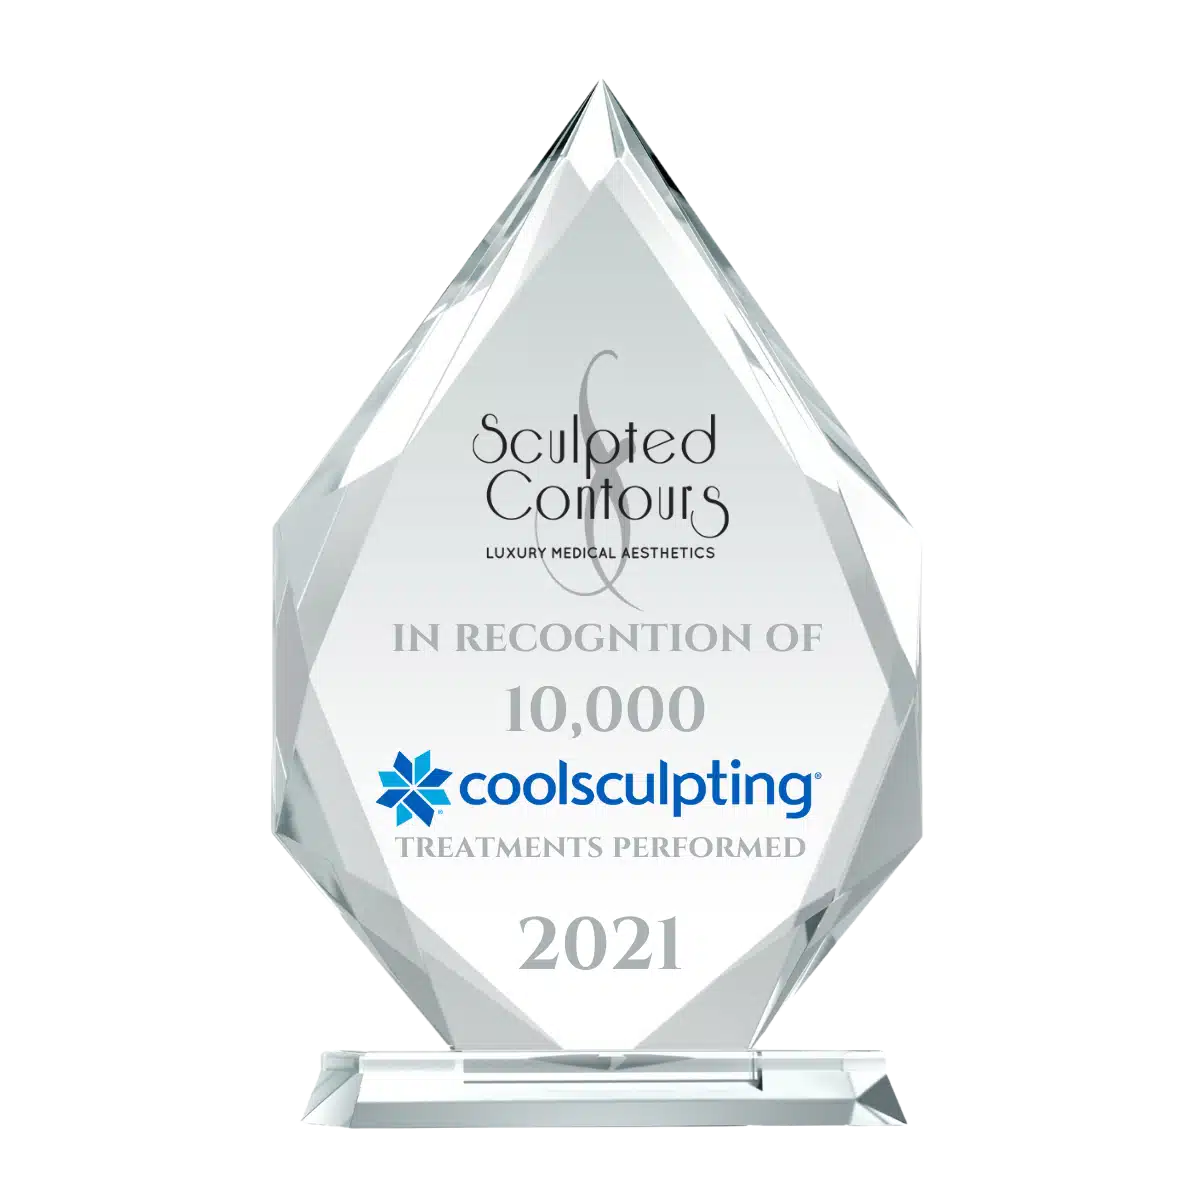 Sculpted Contours was recognized for 10,000 Coolsculpting treatments in Atlanta, GA